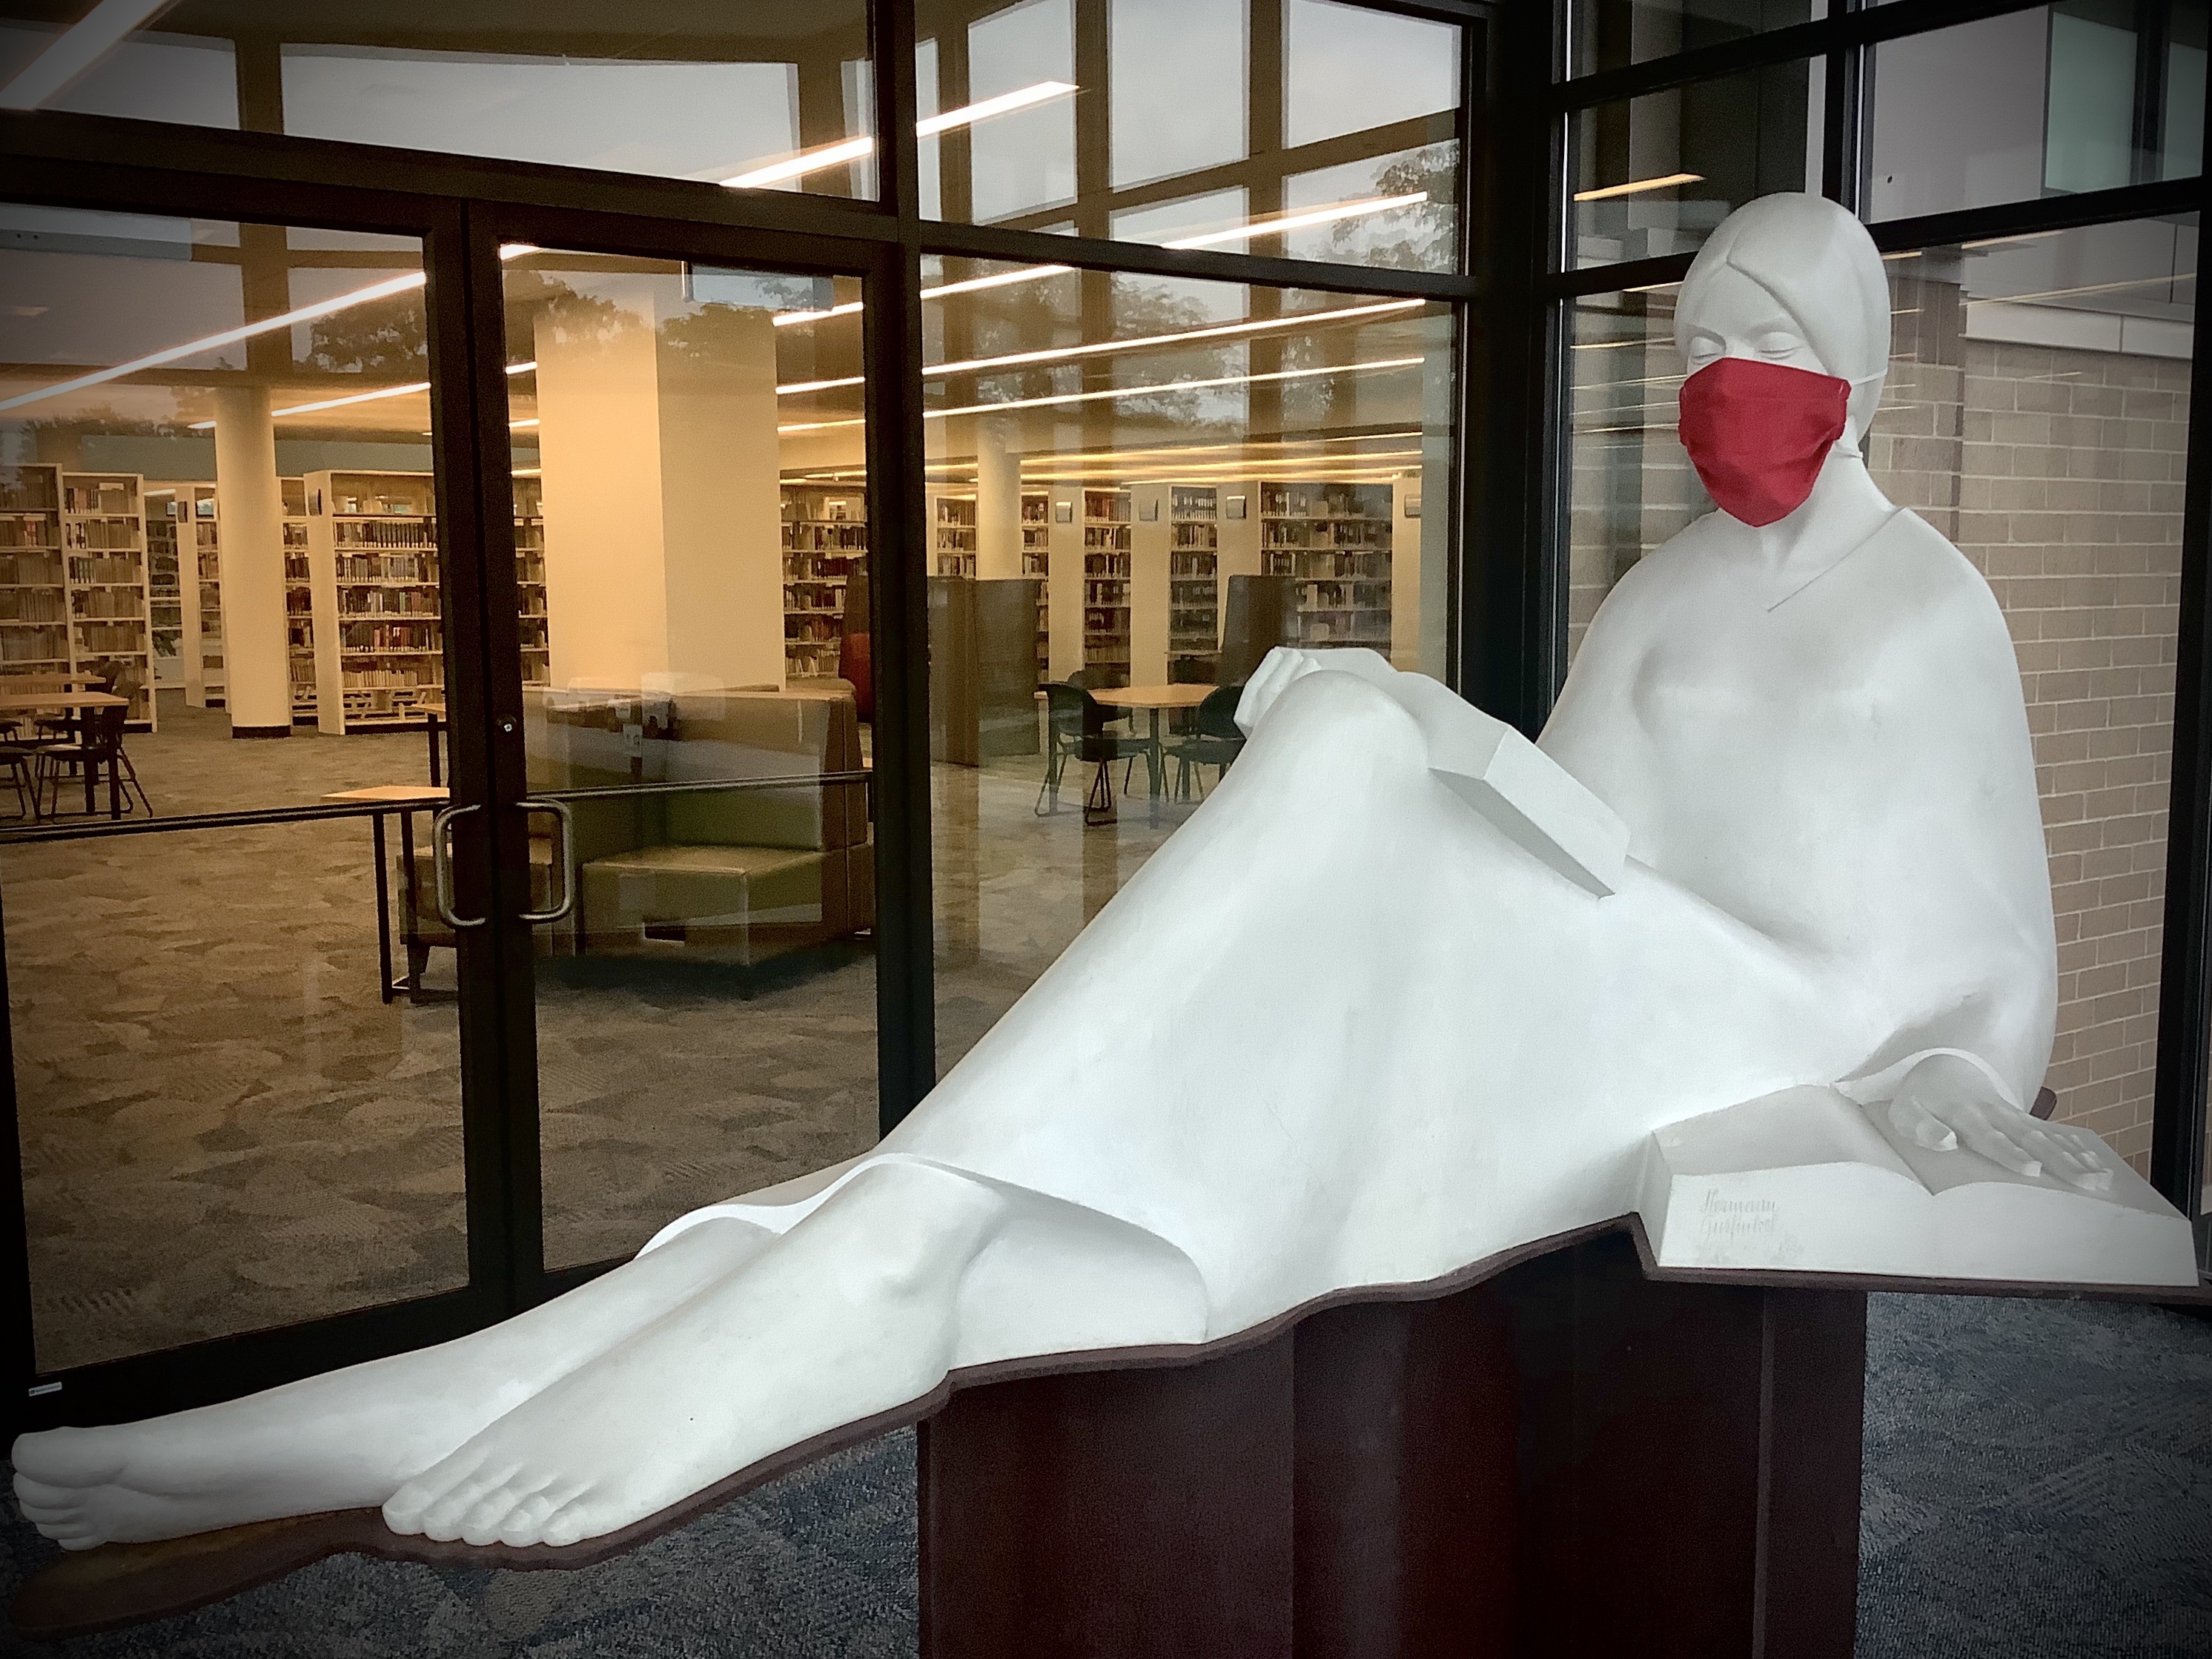 The Reader statue wearing a red mask